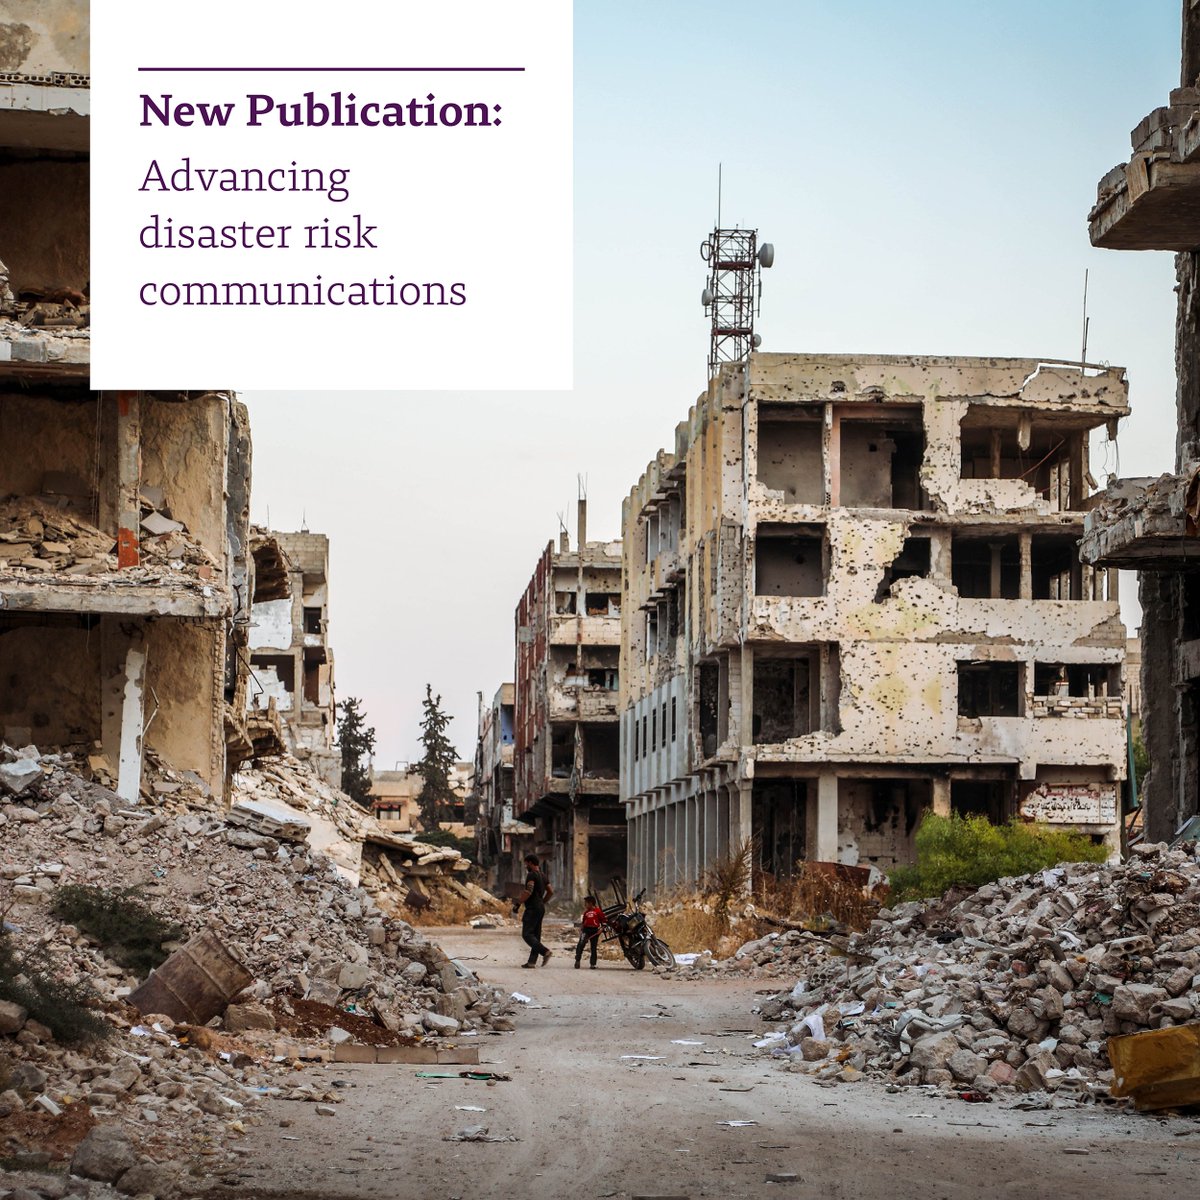 #NewPublication “Advancing disaster risk communications” an open-access review by Prof Iain Stewart, El Hassan bin Talal Research Chair, of 1-way, 2-way and 3-way communication interventions for strategic, people-centred disaster risk reduction efforts. sciencedirect.com/science/articl…